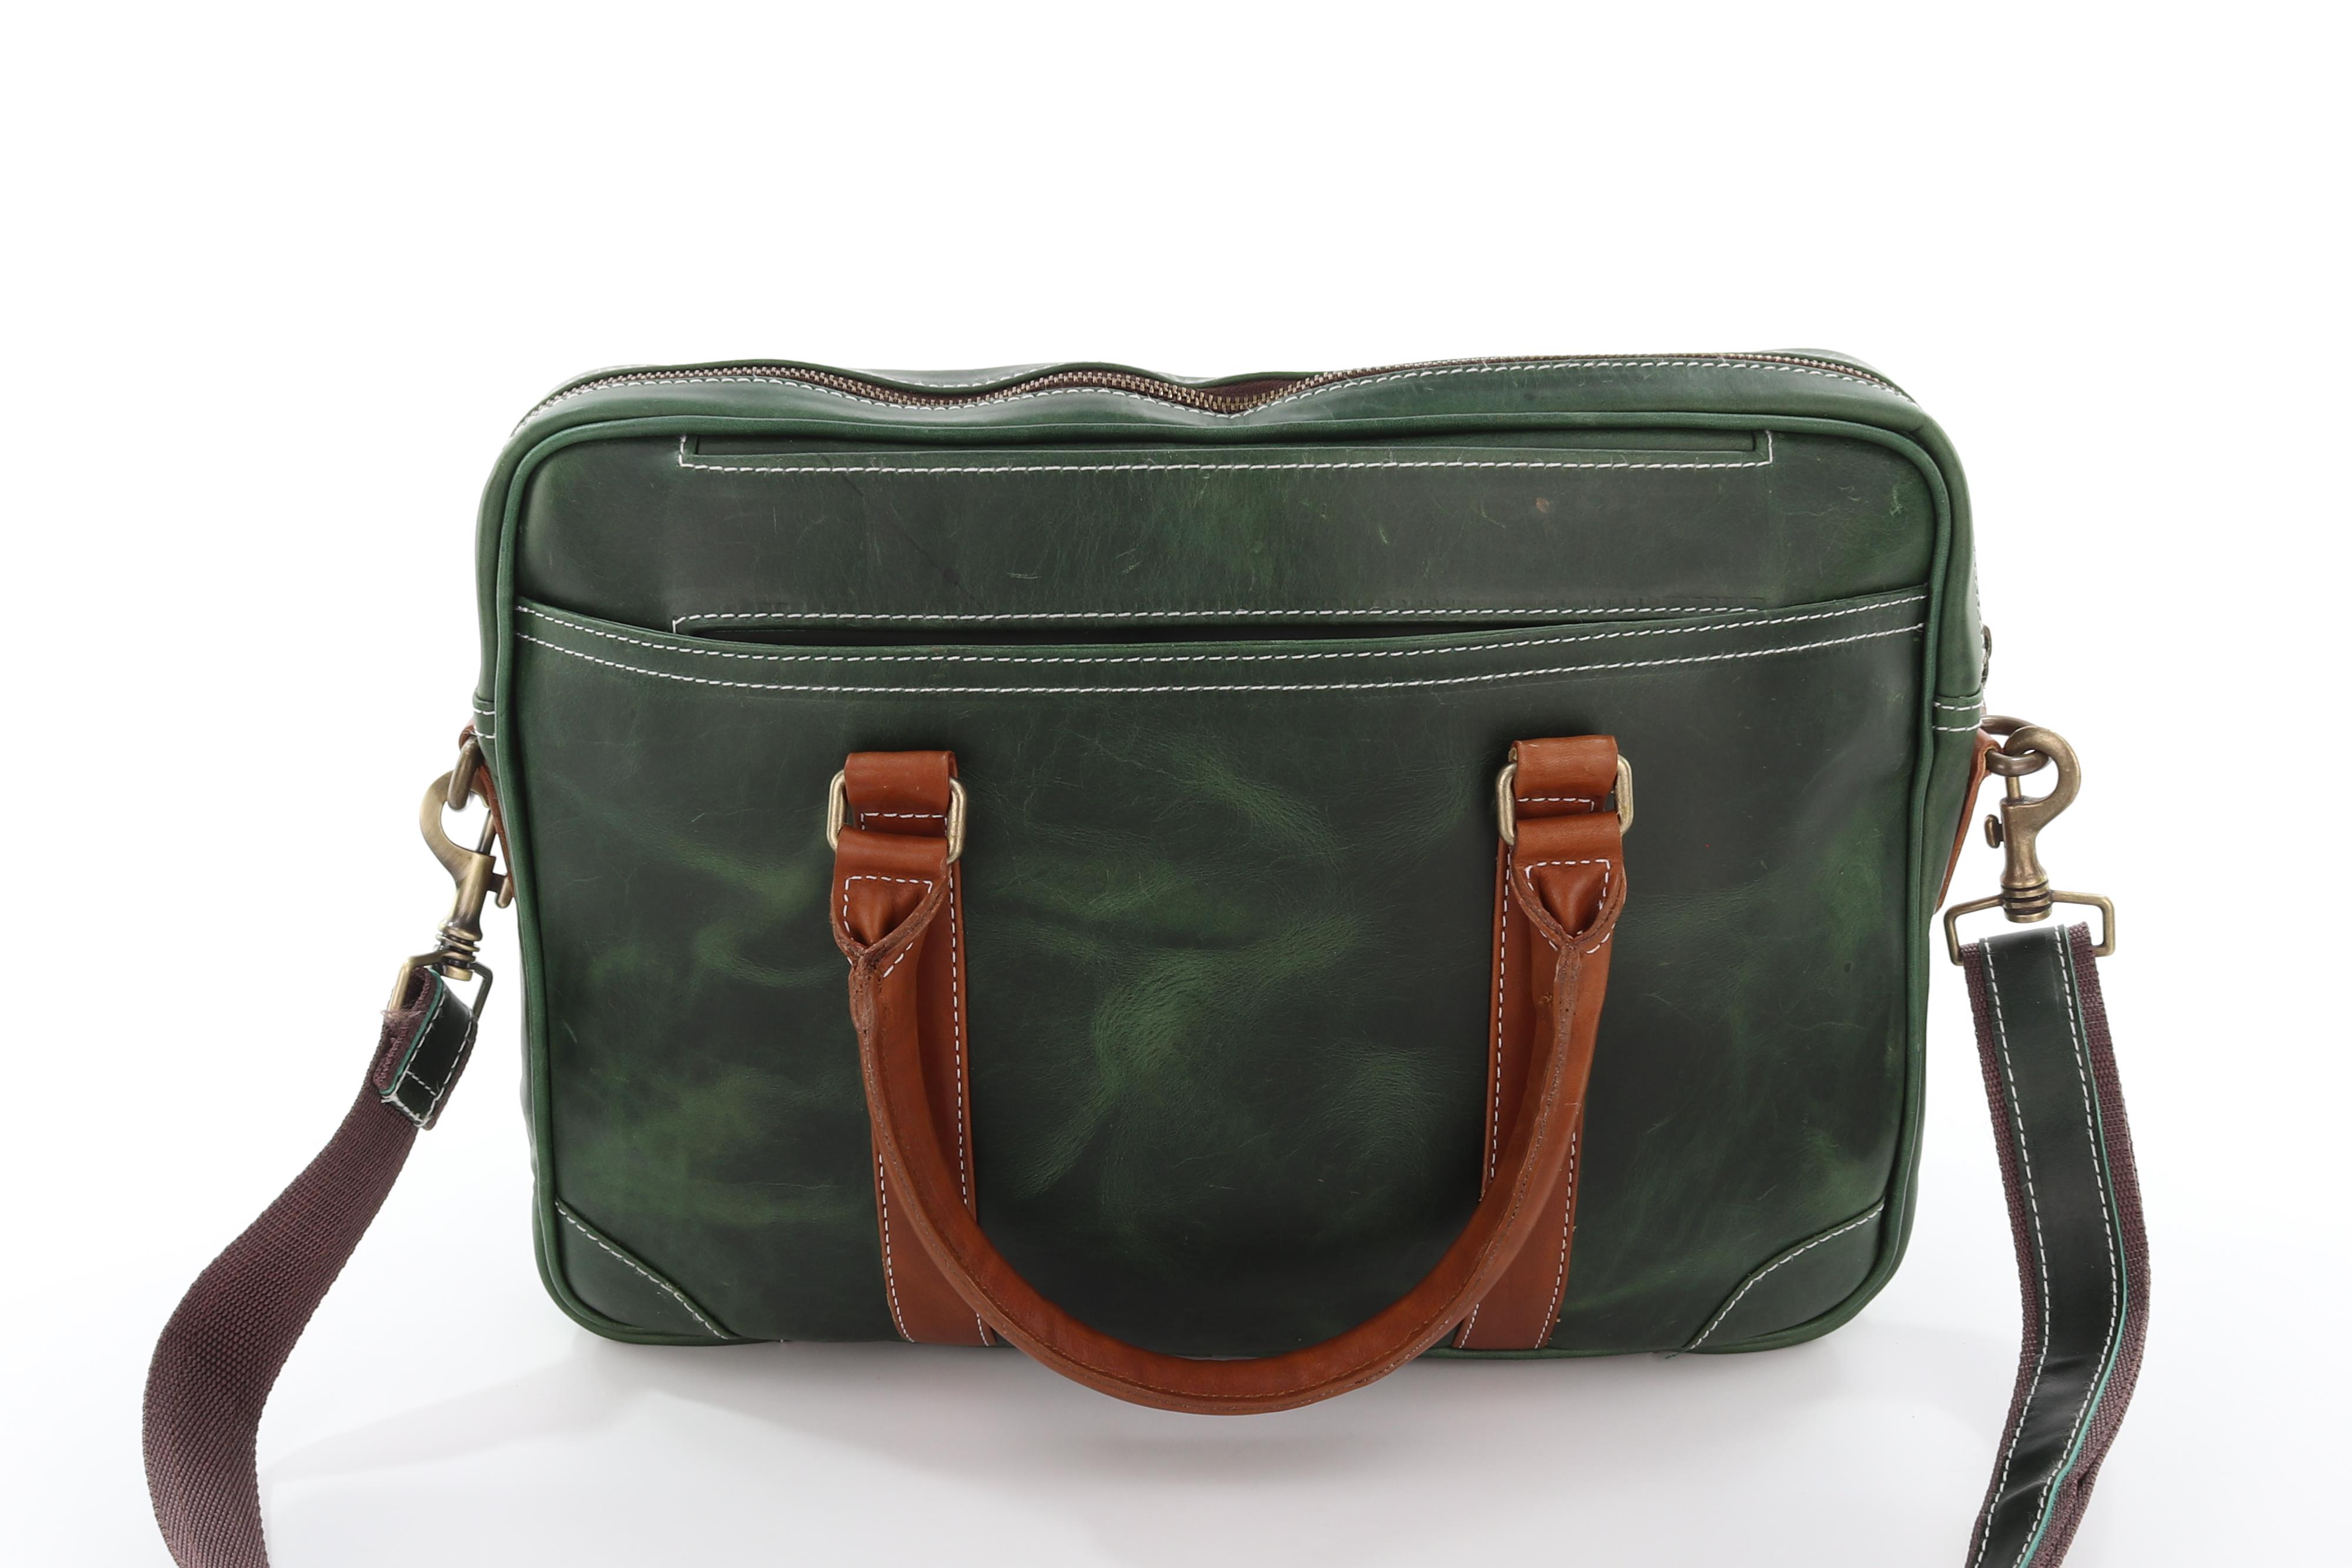 Haden Leather Bag - Laptop Bag - Green - Front view4